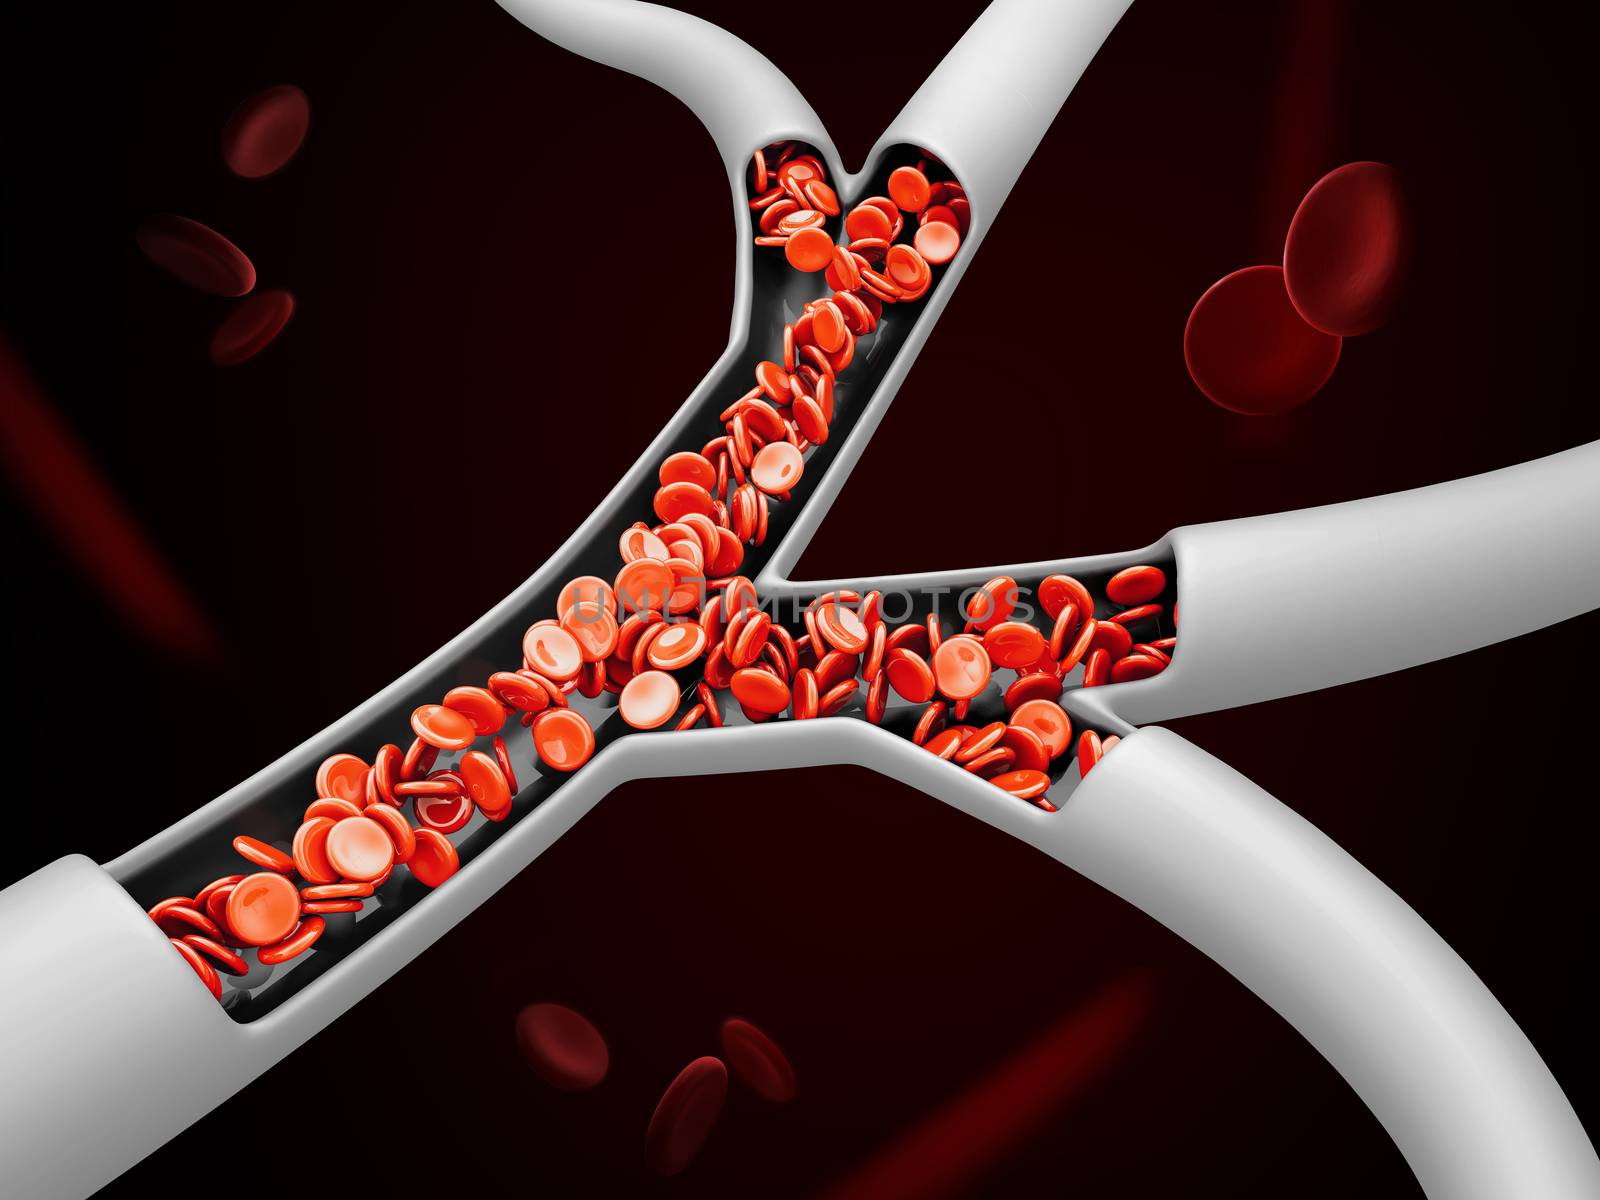 3d Illustration of red blood cells in vein, clipping path included by tussik